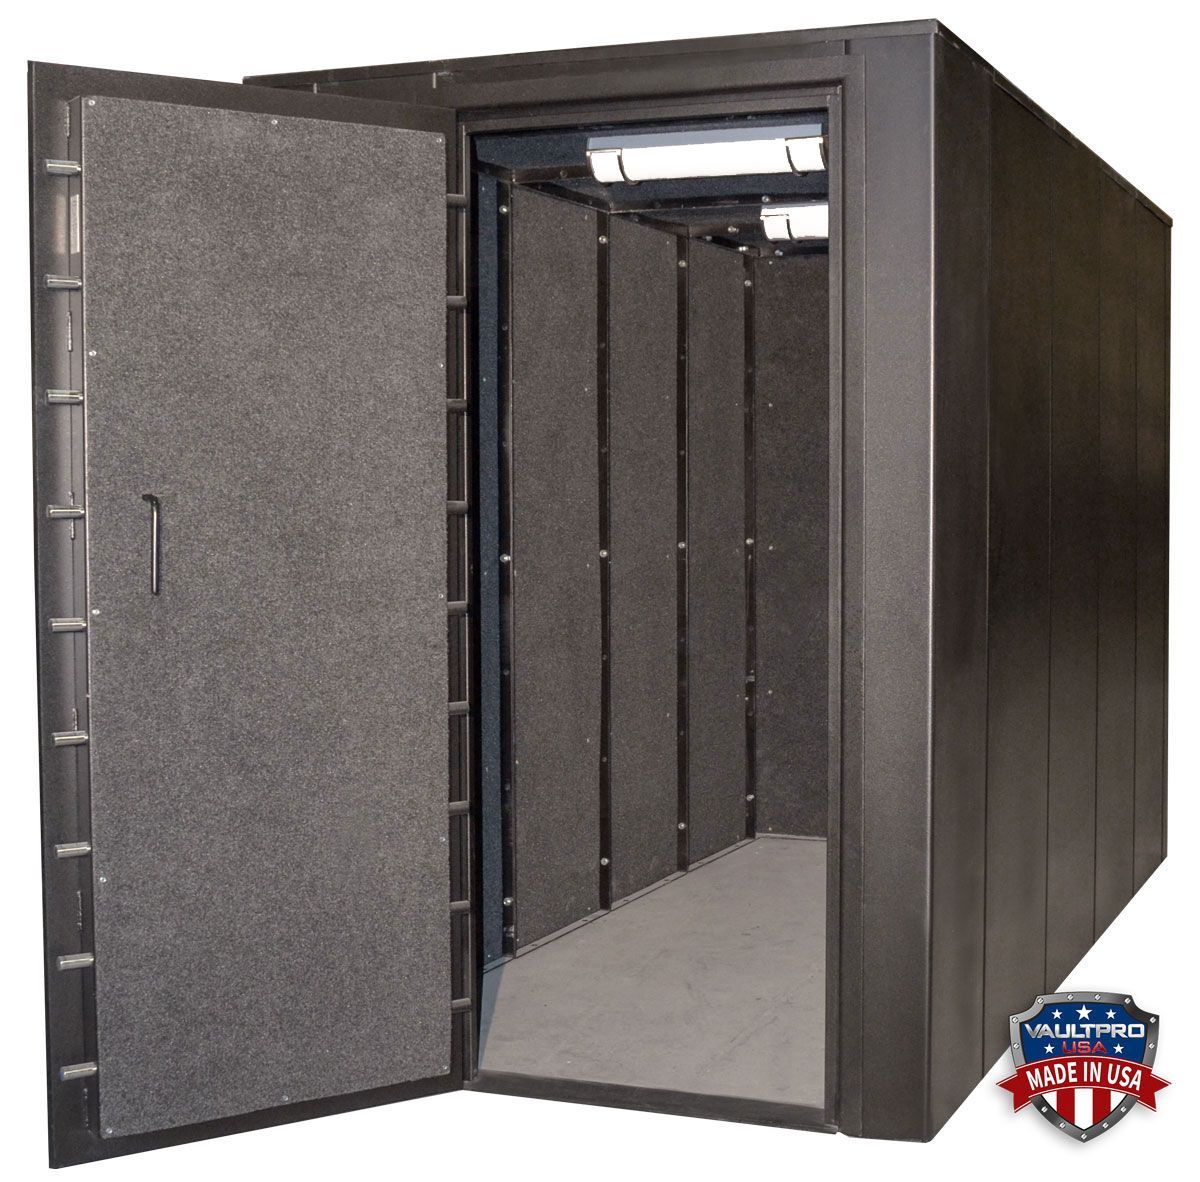 Image of fully modular shelter safe room made by Vault Pro USA